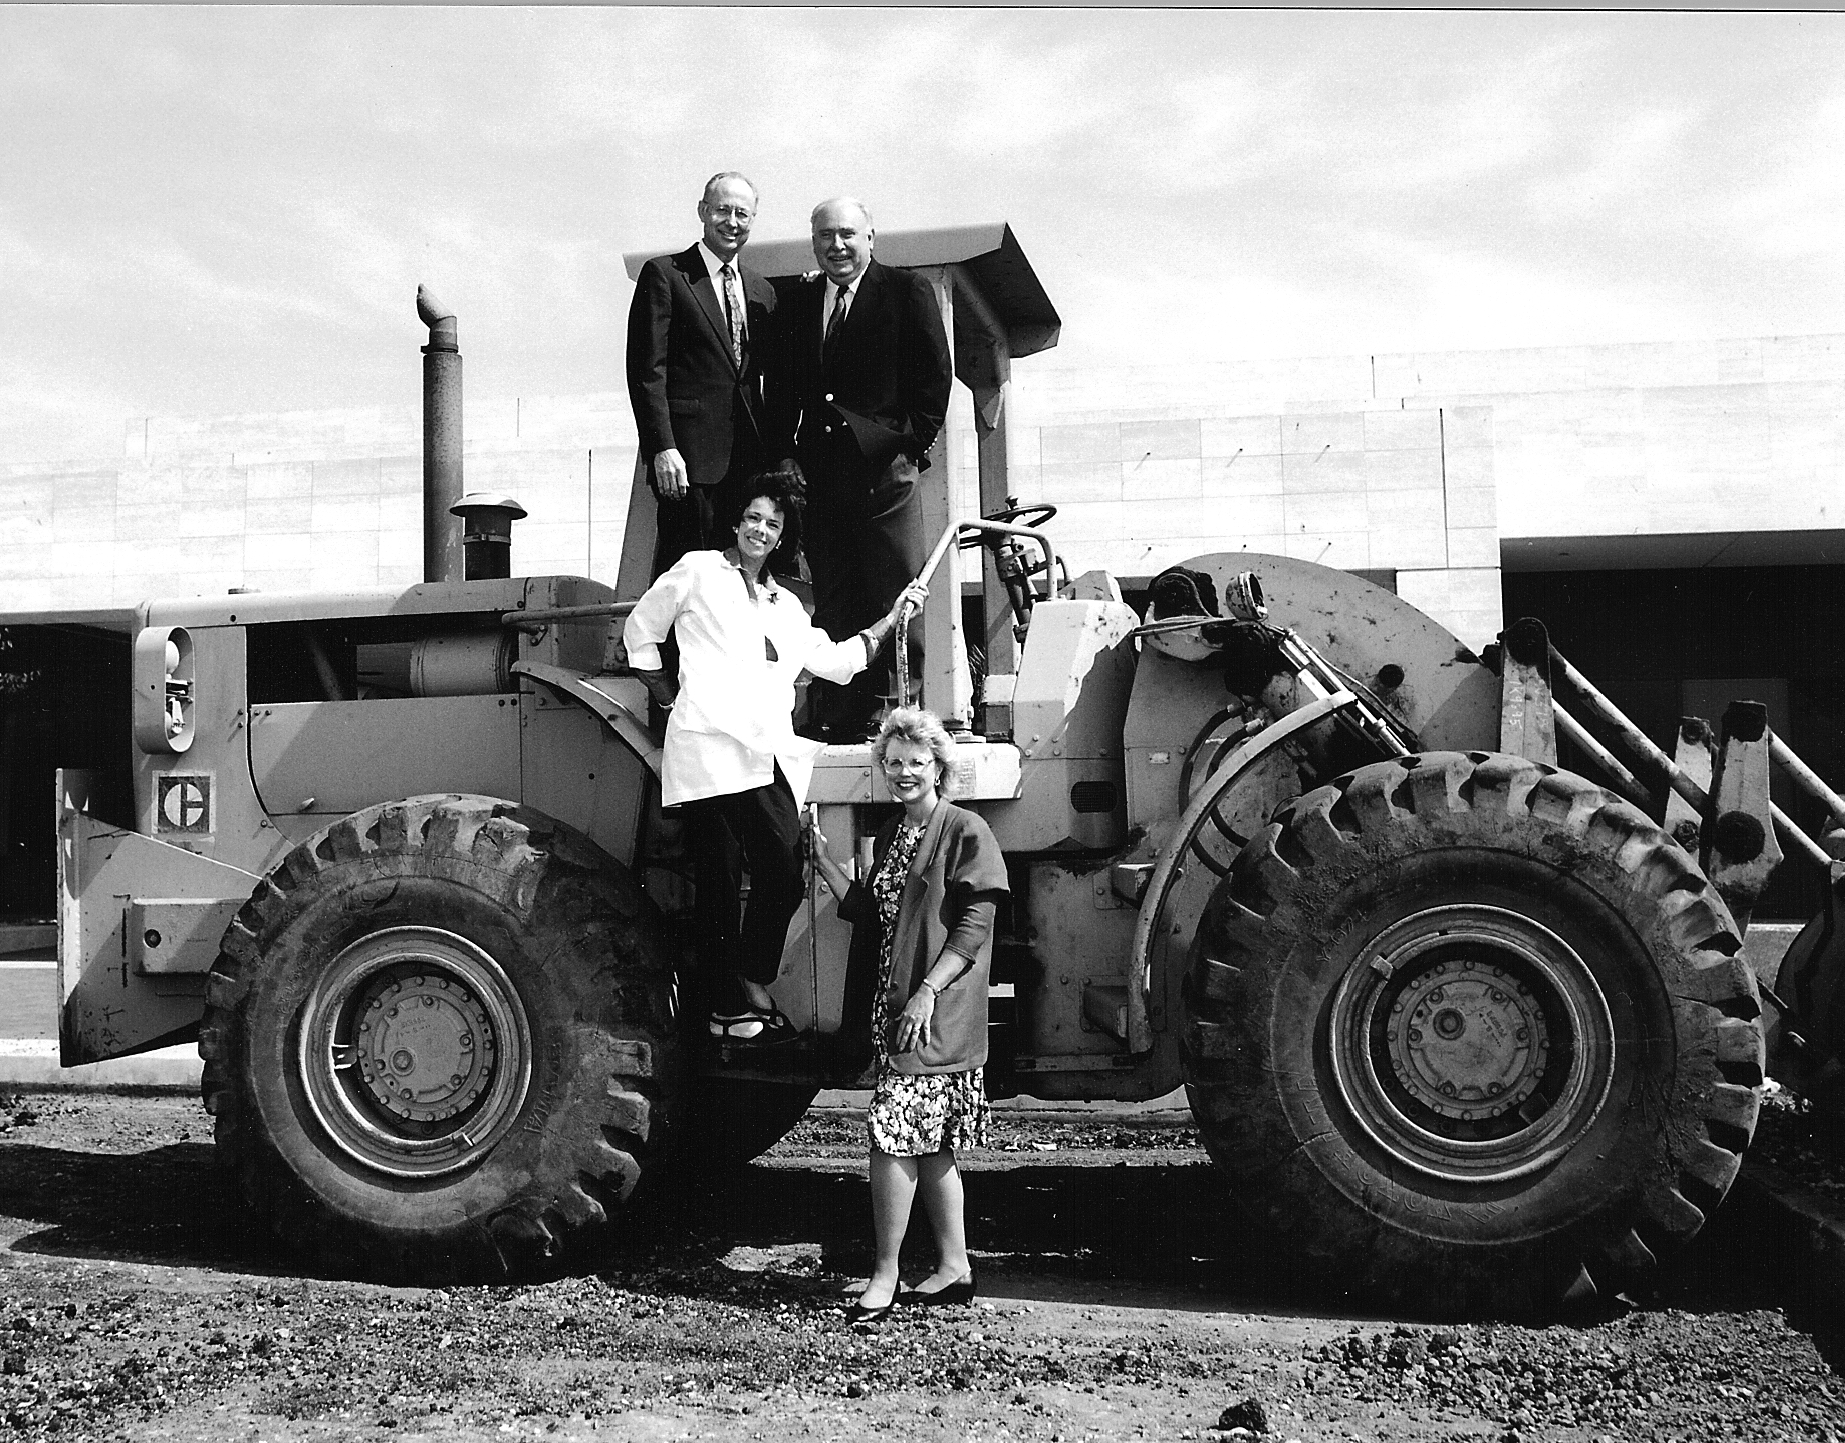 Robert Huber, MD, George Graham, Patricia Sacks, MD and Sally Eberhard aboard a bulldozer at the Polak Breast Diagnostic Center construction site